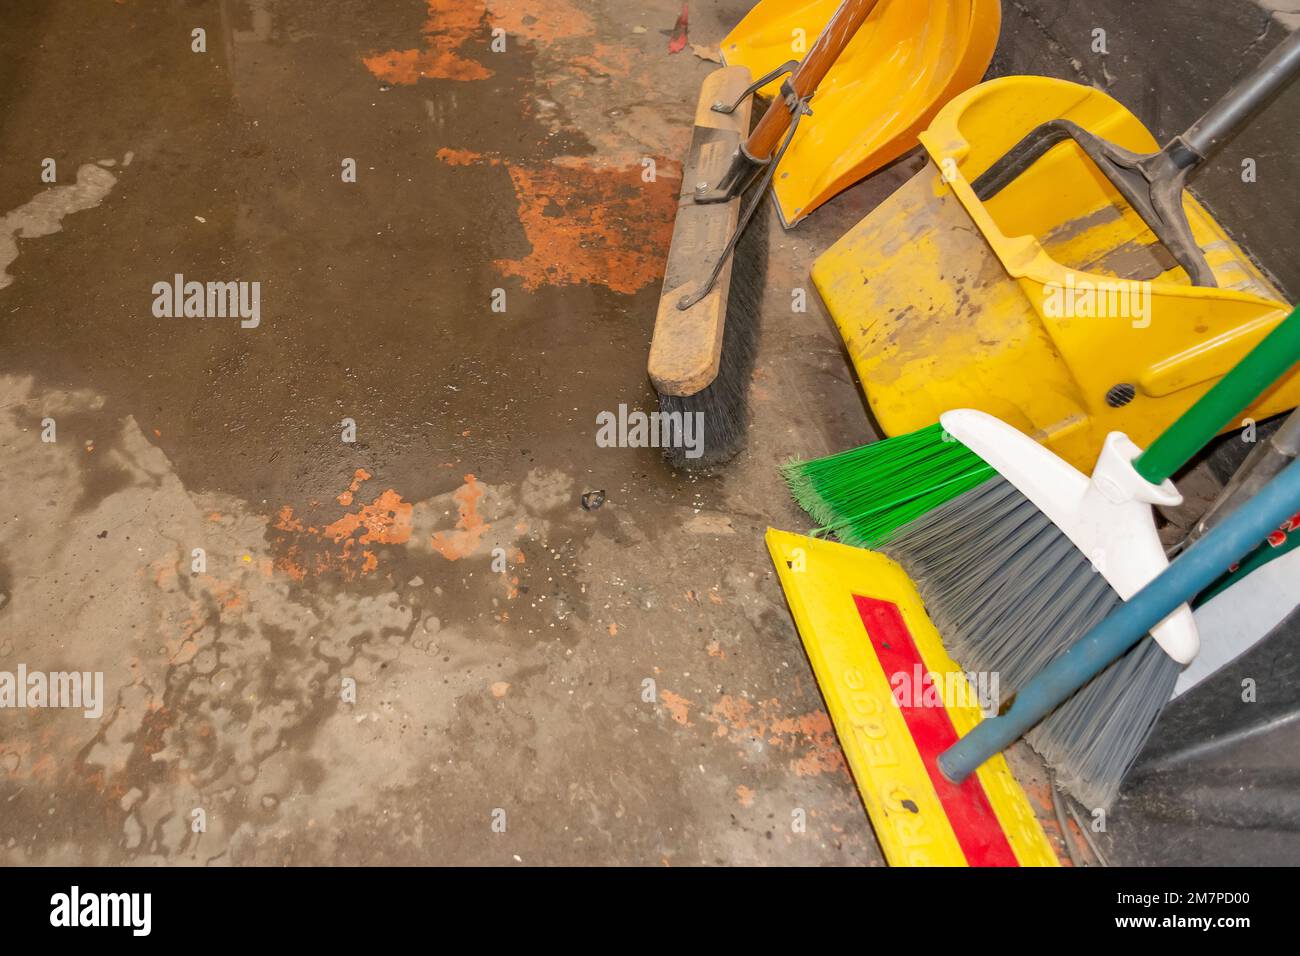 brooms and dustpan on a pile of cleaning materials on a wet cement floor in a garage Stock Photo